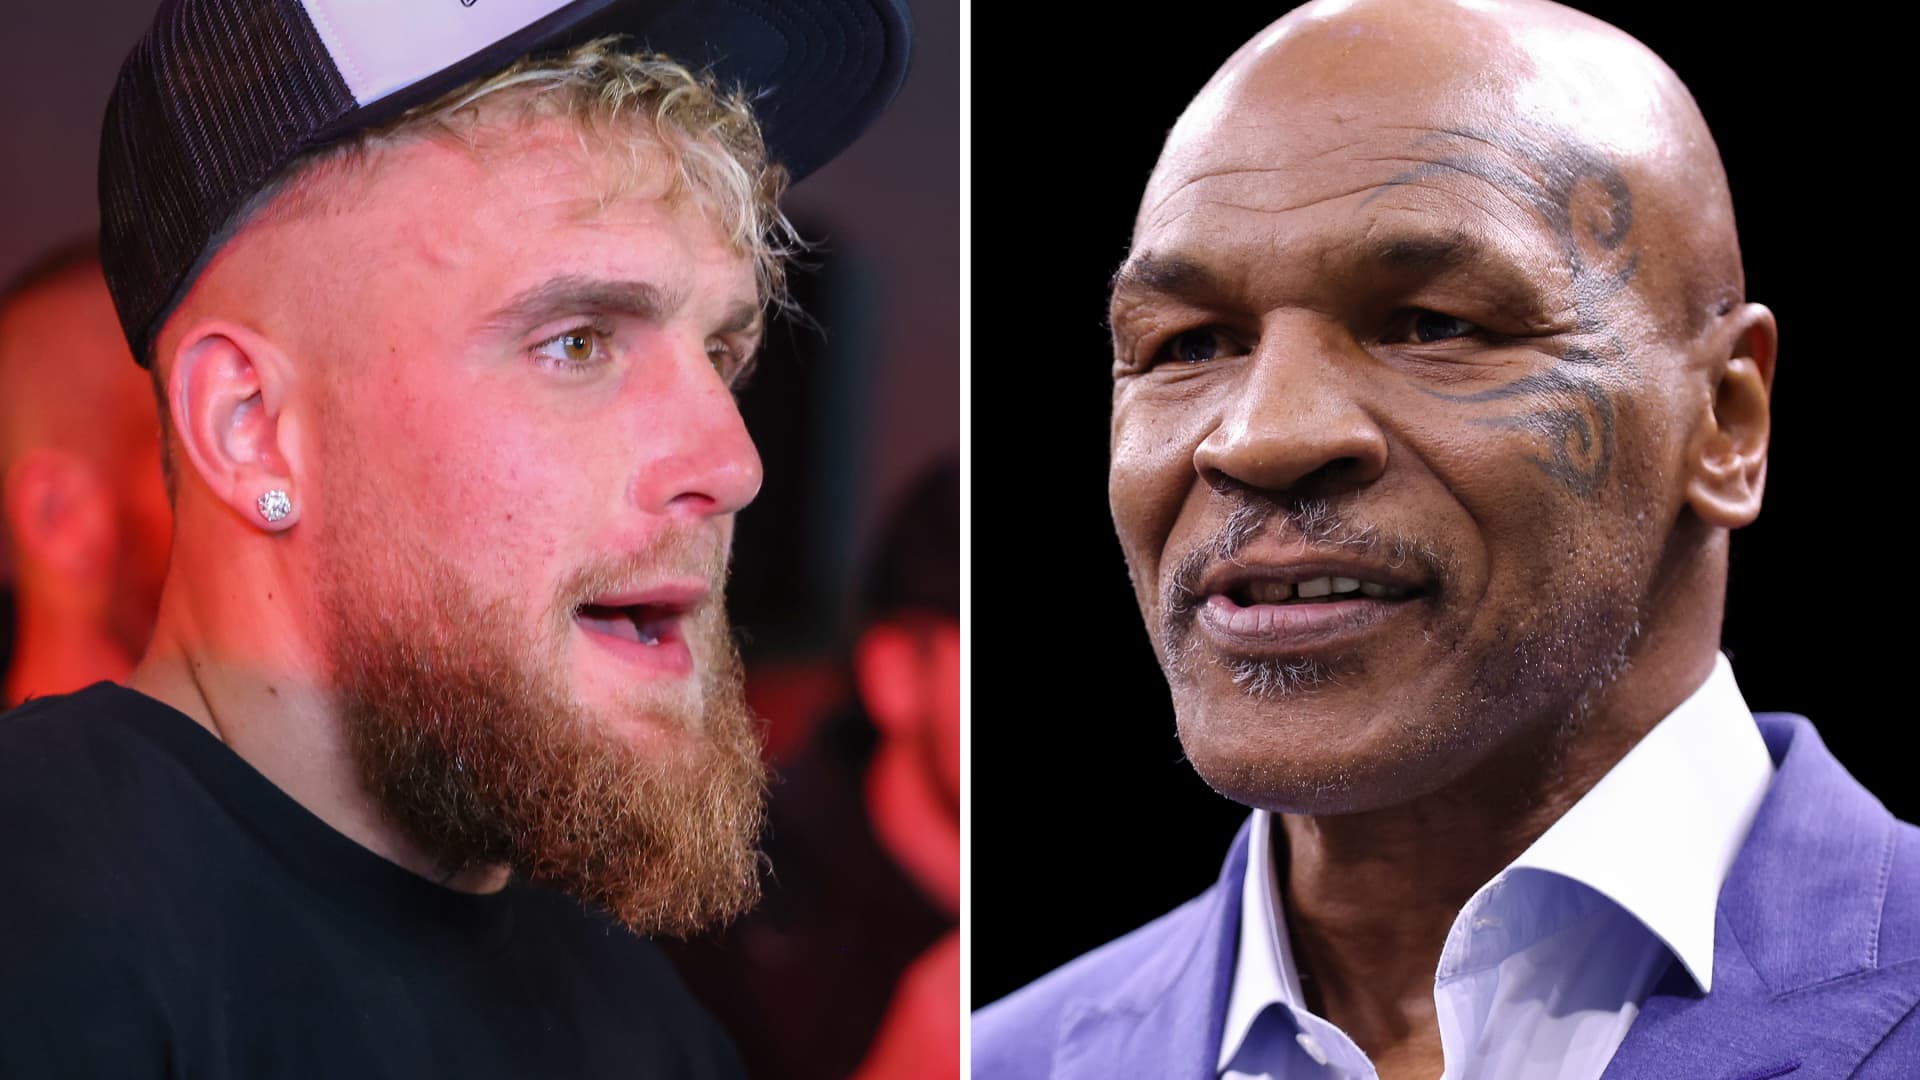 Jake Paul to fight Mike Tyson in boxing match streamed live on Netflix